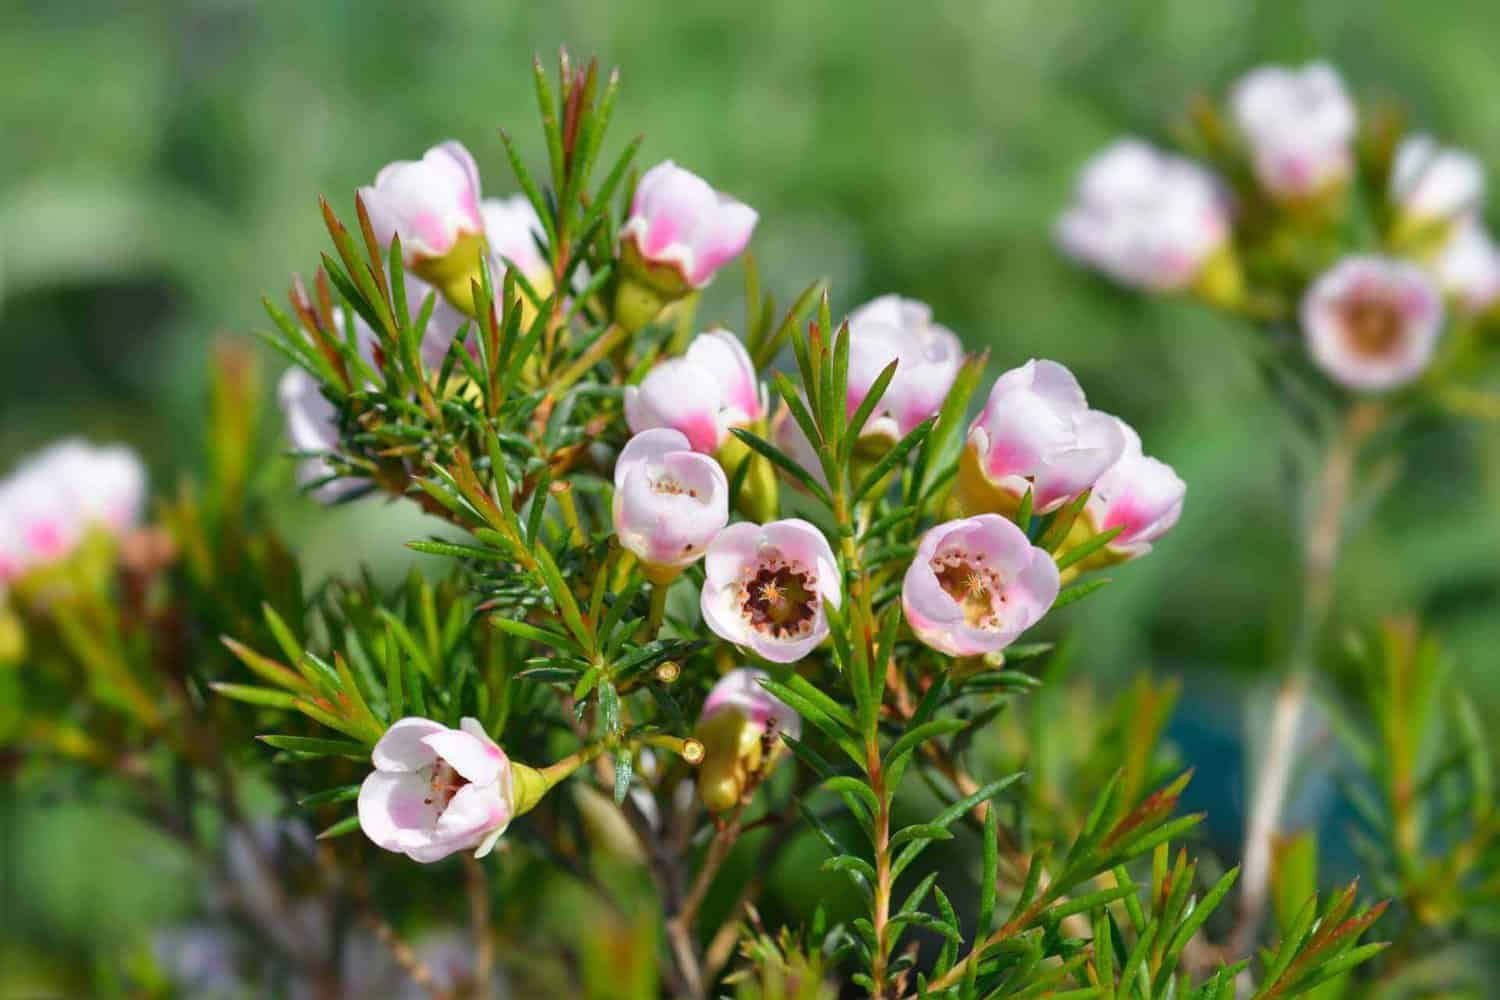 Close-up of delicate pink Geraldton wax flowers with soft petals and prominent stamens, nestled among vibrant green foliage.